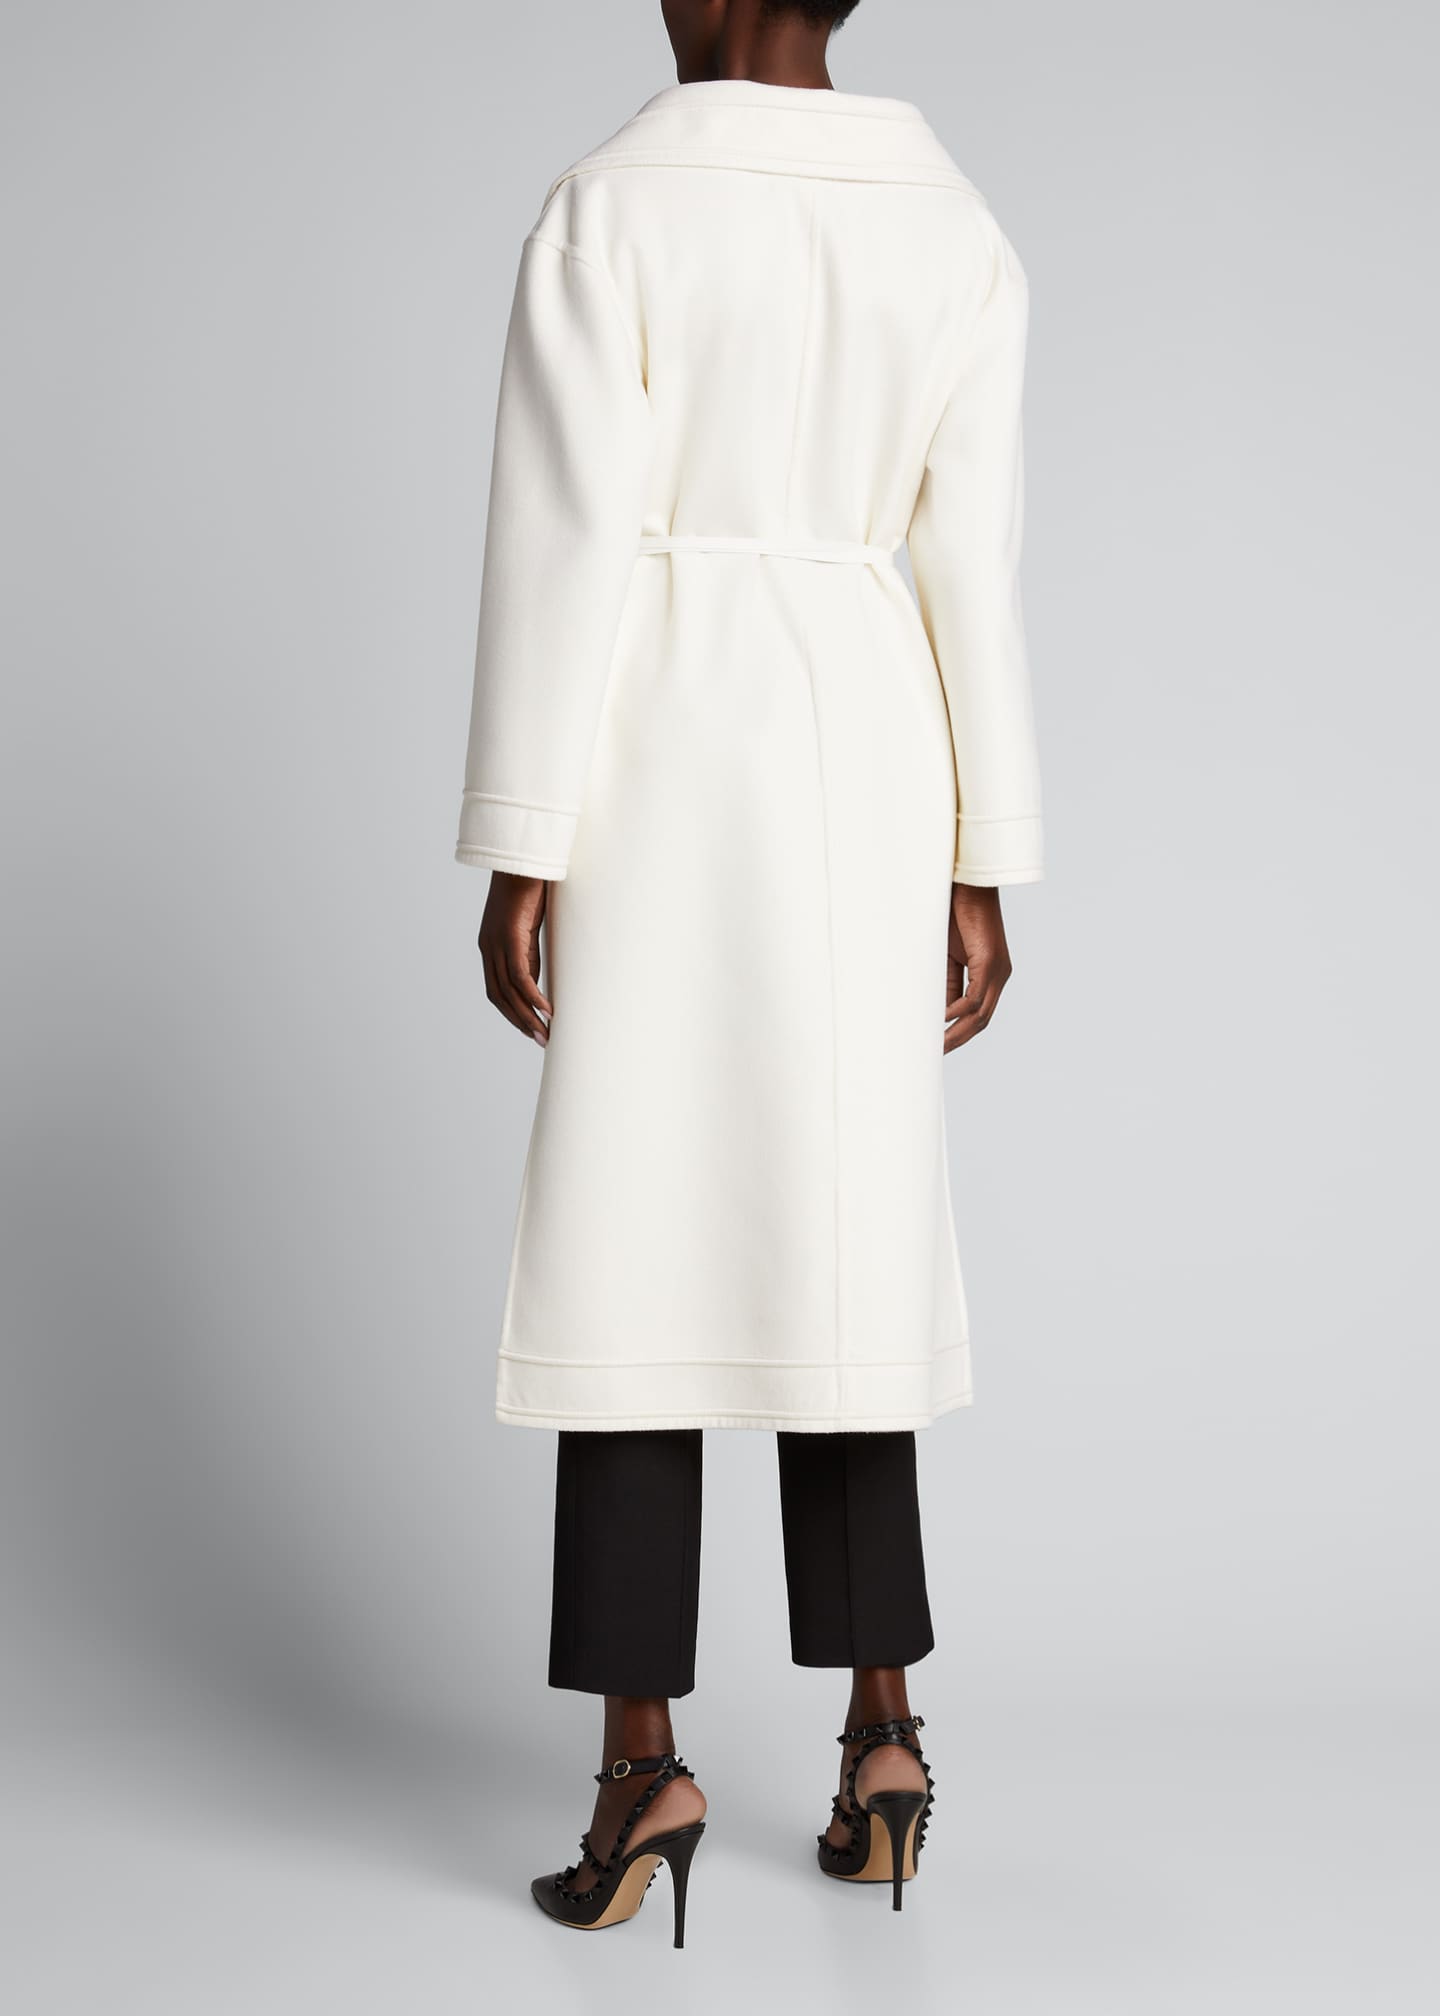 Valentino Compact Wool-Cashmere Wrap Coat w/ Leather Ties - Bergdorf ...